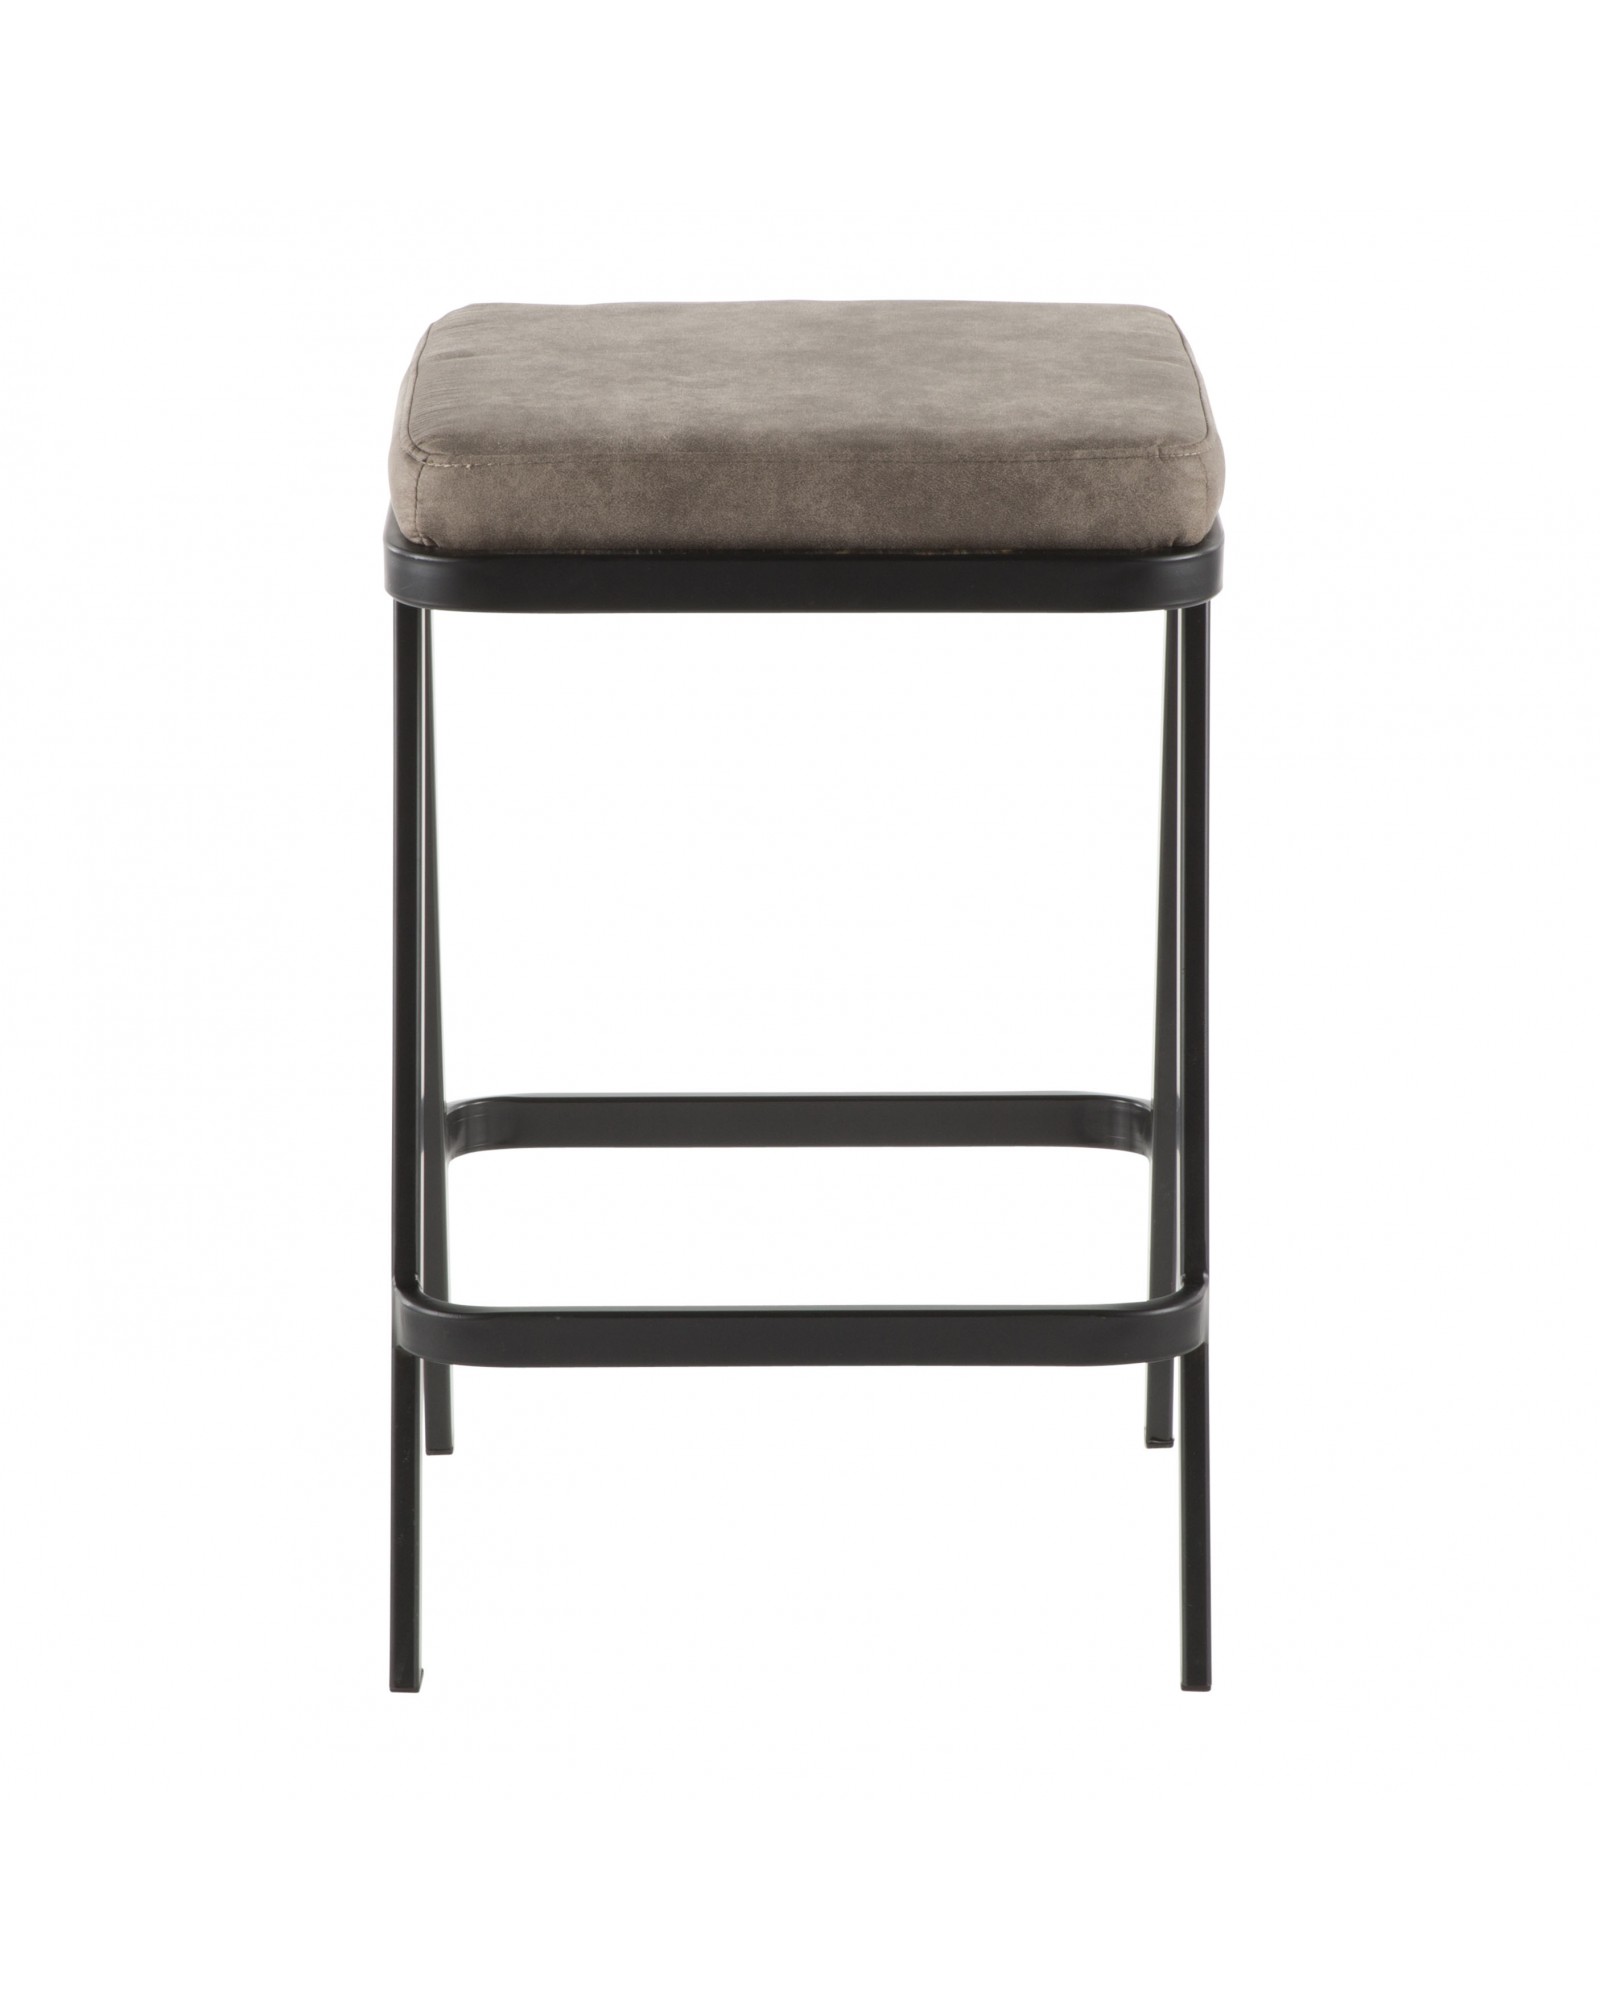 Seven Industrial Counter Stool in Black Metal and Grey Cowboy Fabric